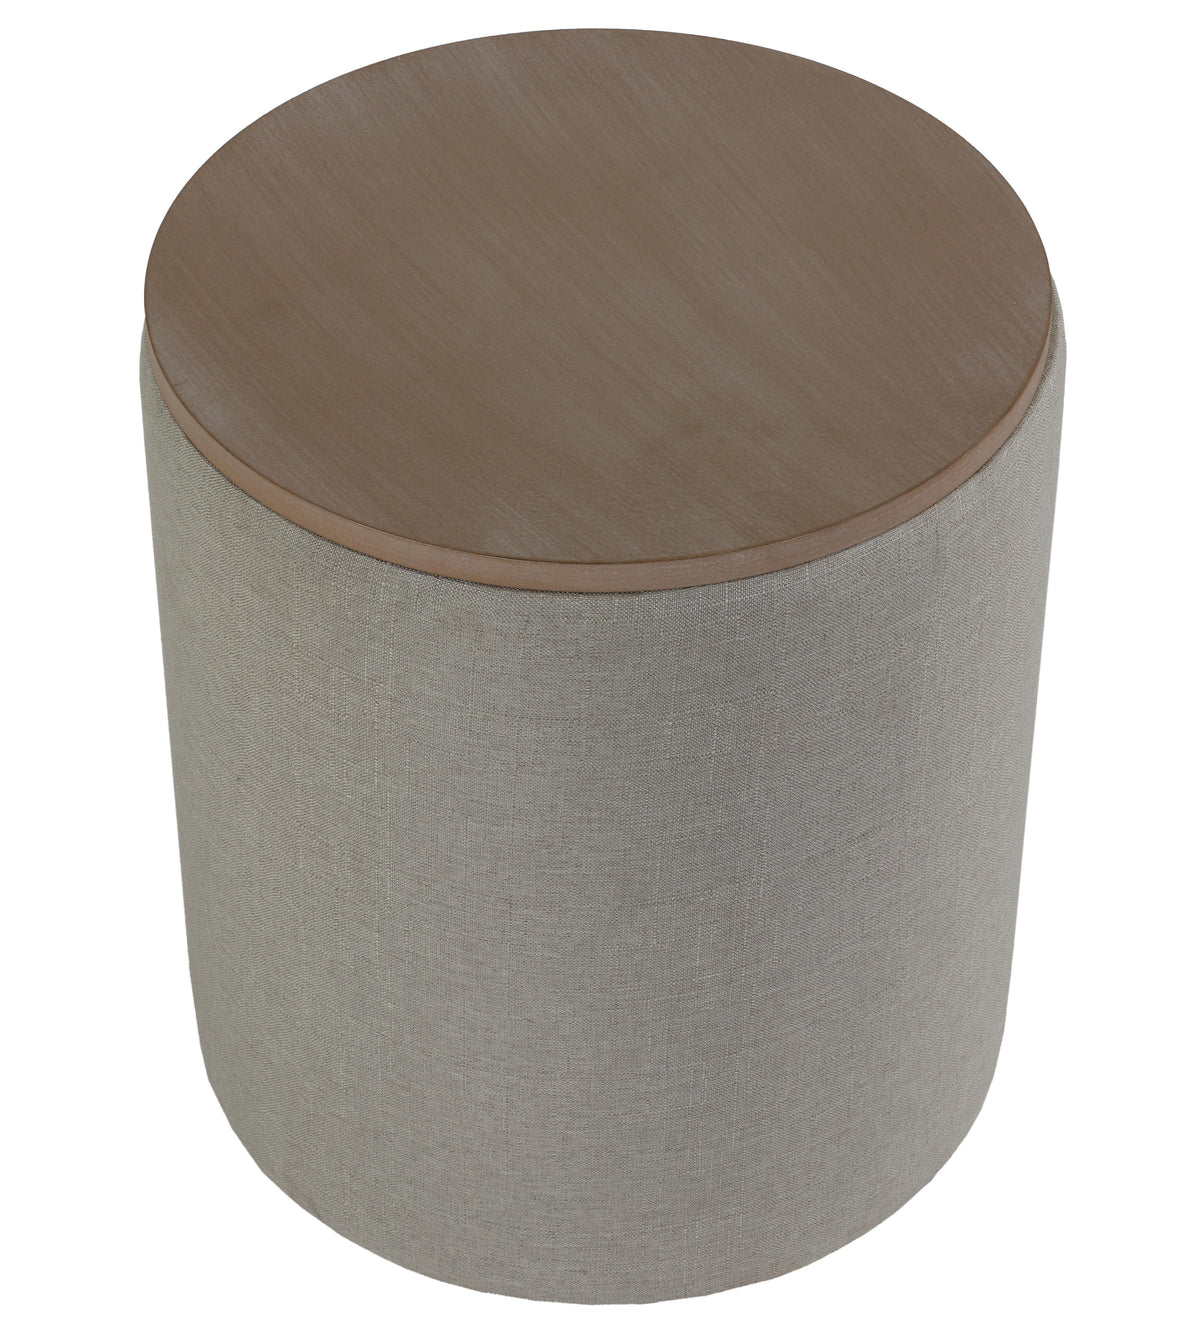 Cortesi Home Vancouver Round Storage Ottoman with Wood Top